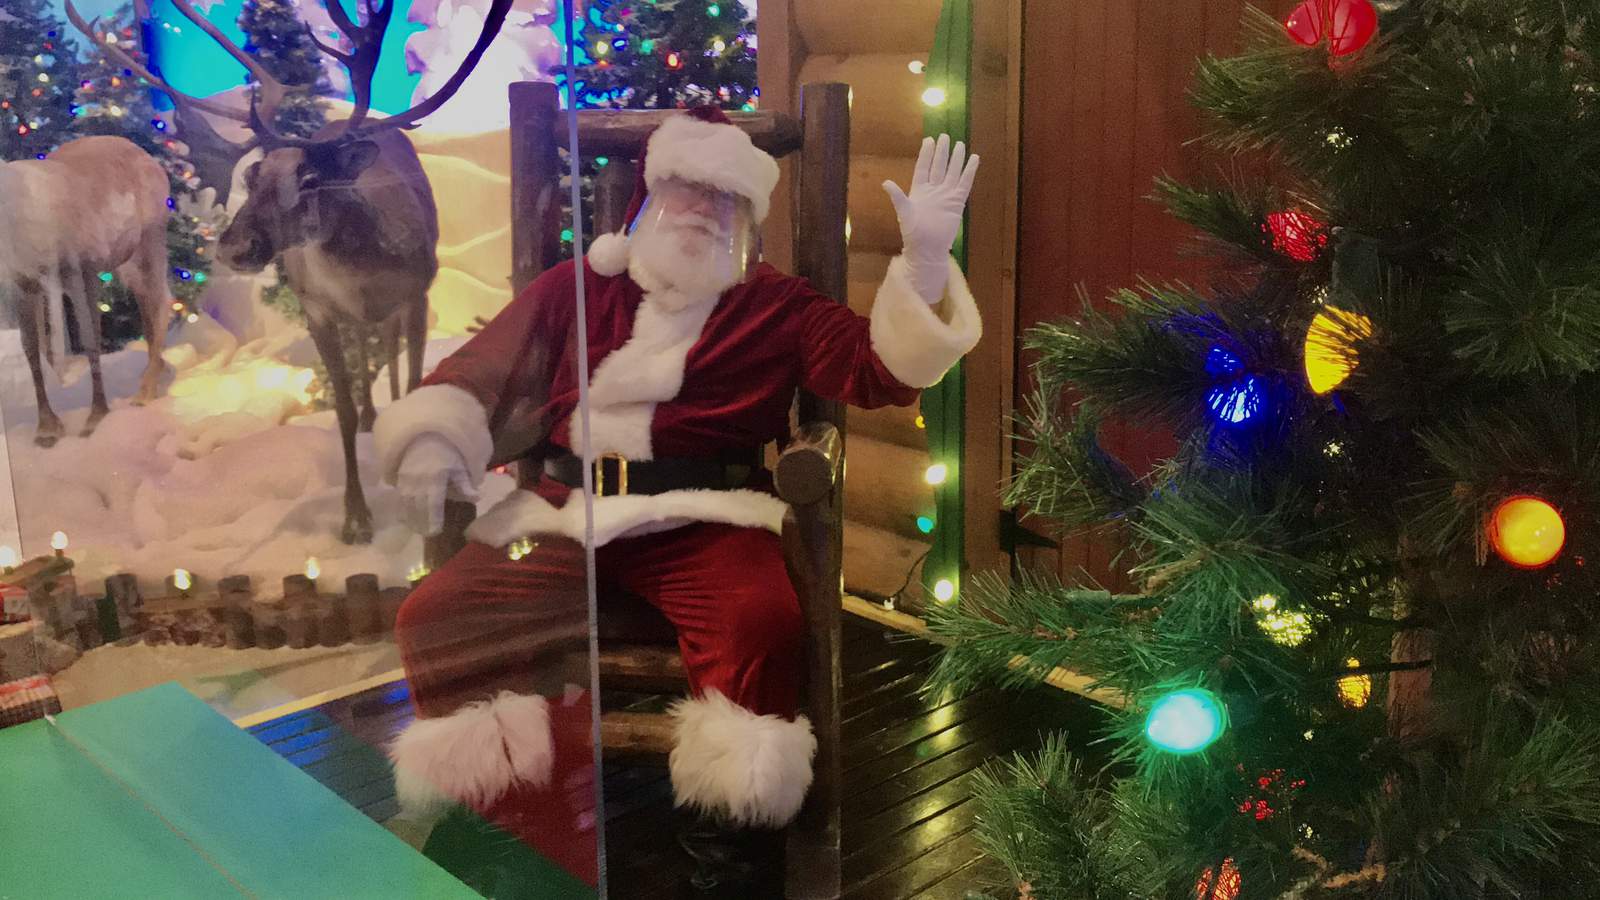 SANTA-tized: Here is where you can get Santa photos this Christmas